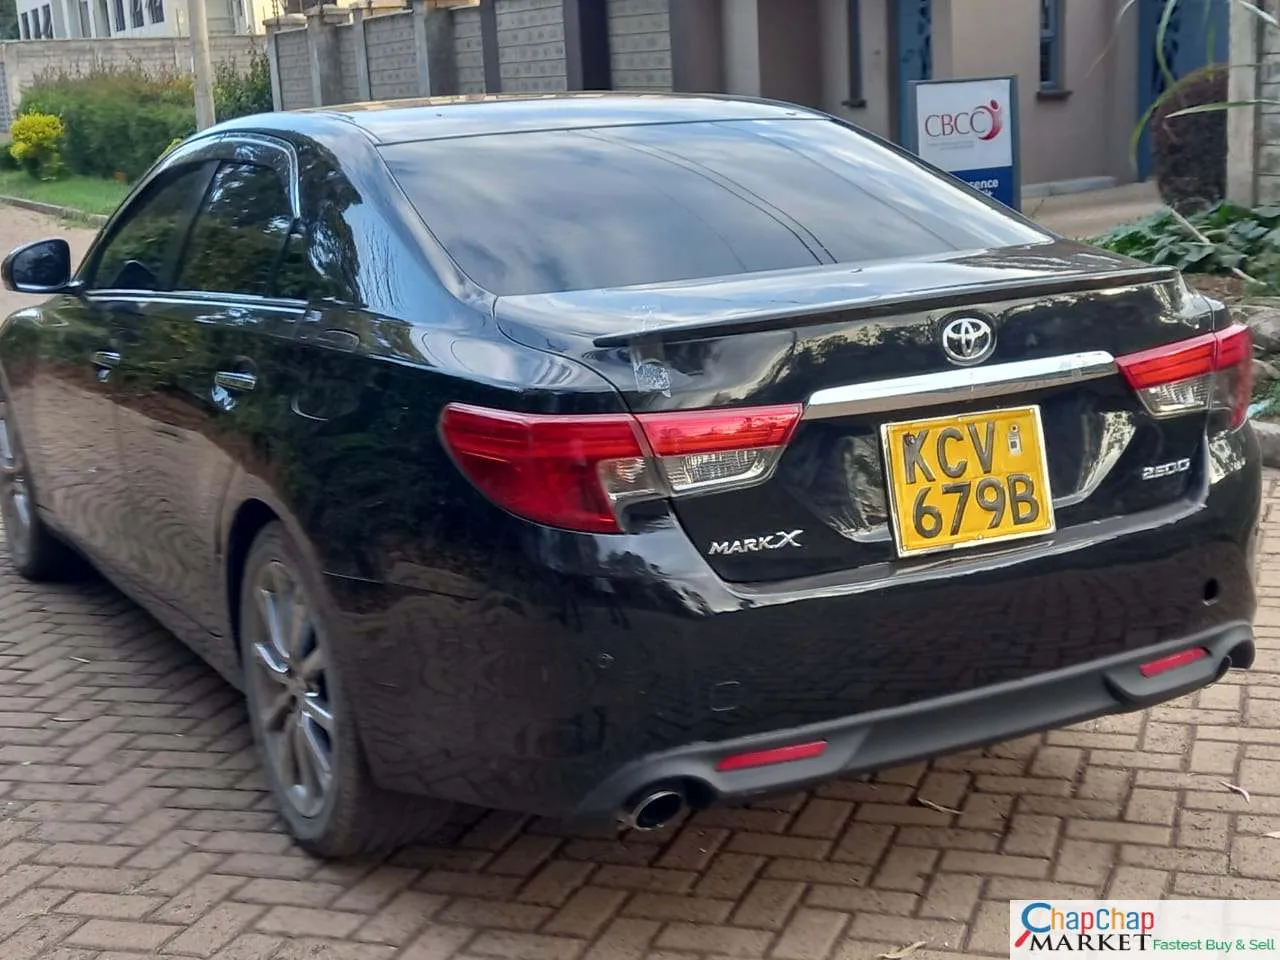 Cars Cars For Sale-Toyota Mark X Kenya with sunroof QUICK SALE You Pay 30% Deposit Trade in OK EXCLUSIVE Mark x for sale in kenya hire purchase 9